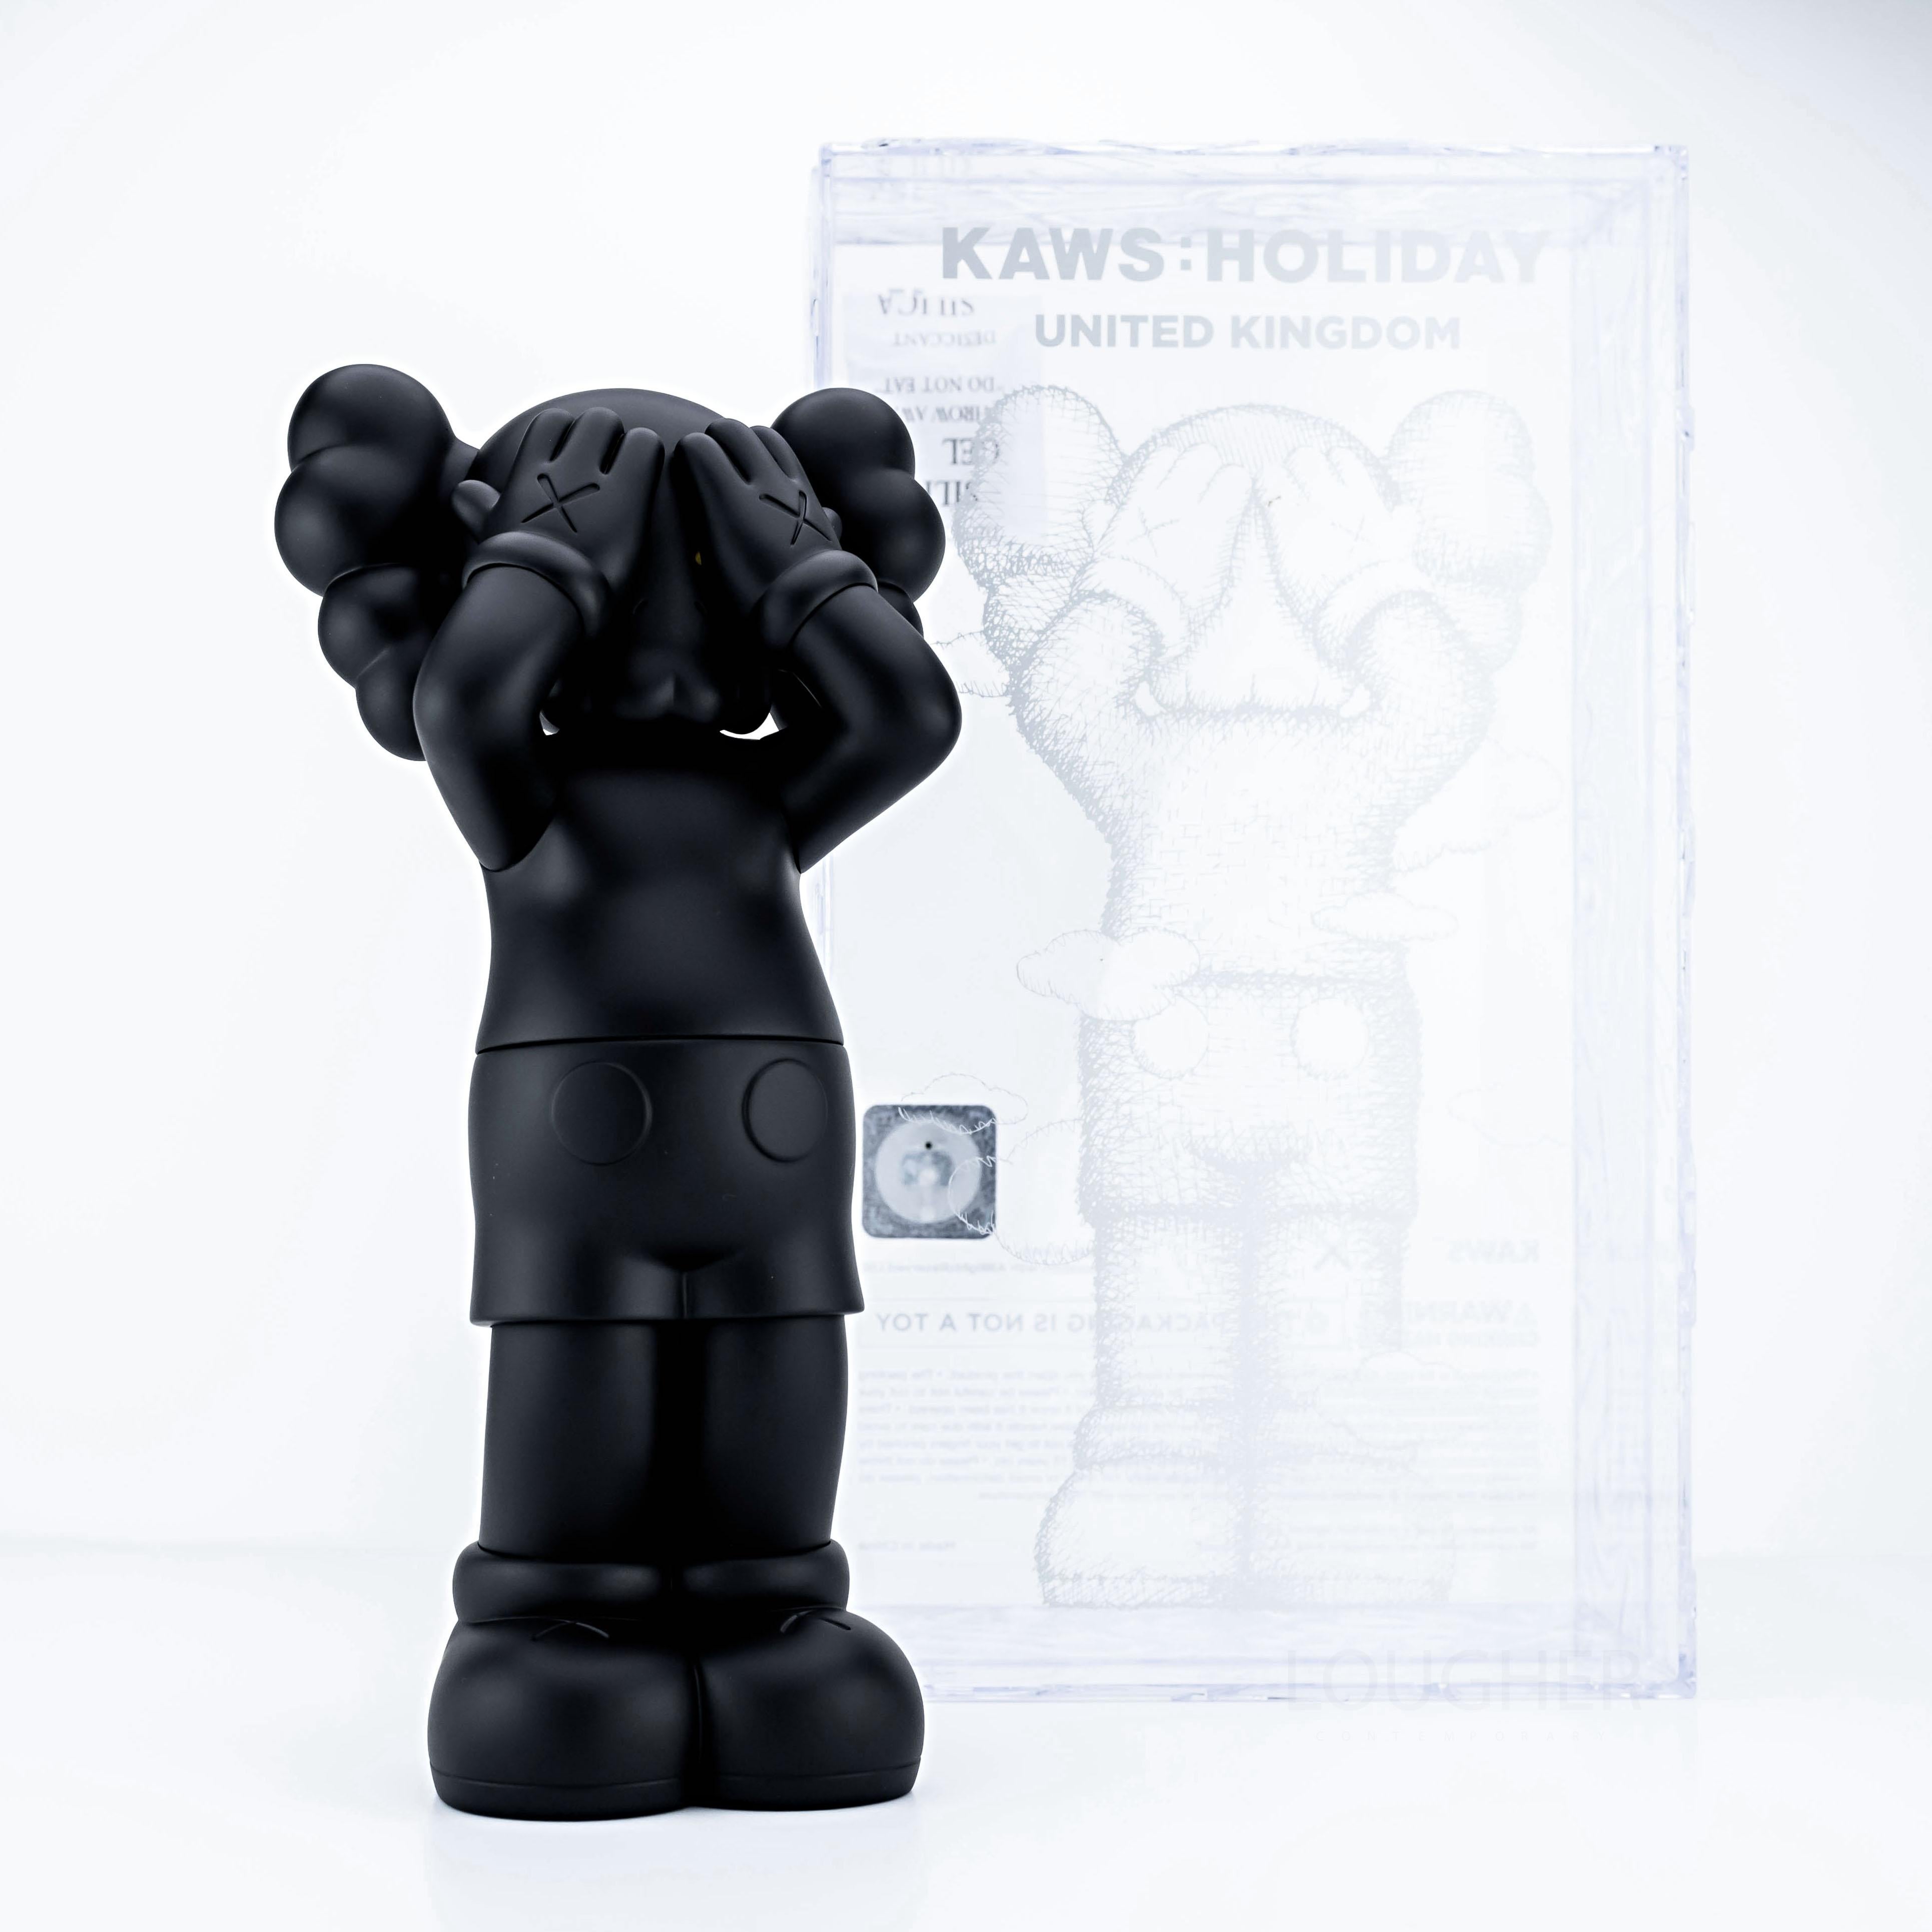 Holiday UK (Black) - Sculpture by KAWS